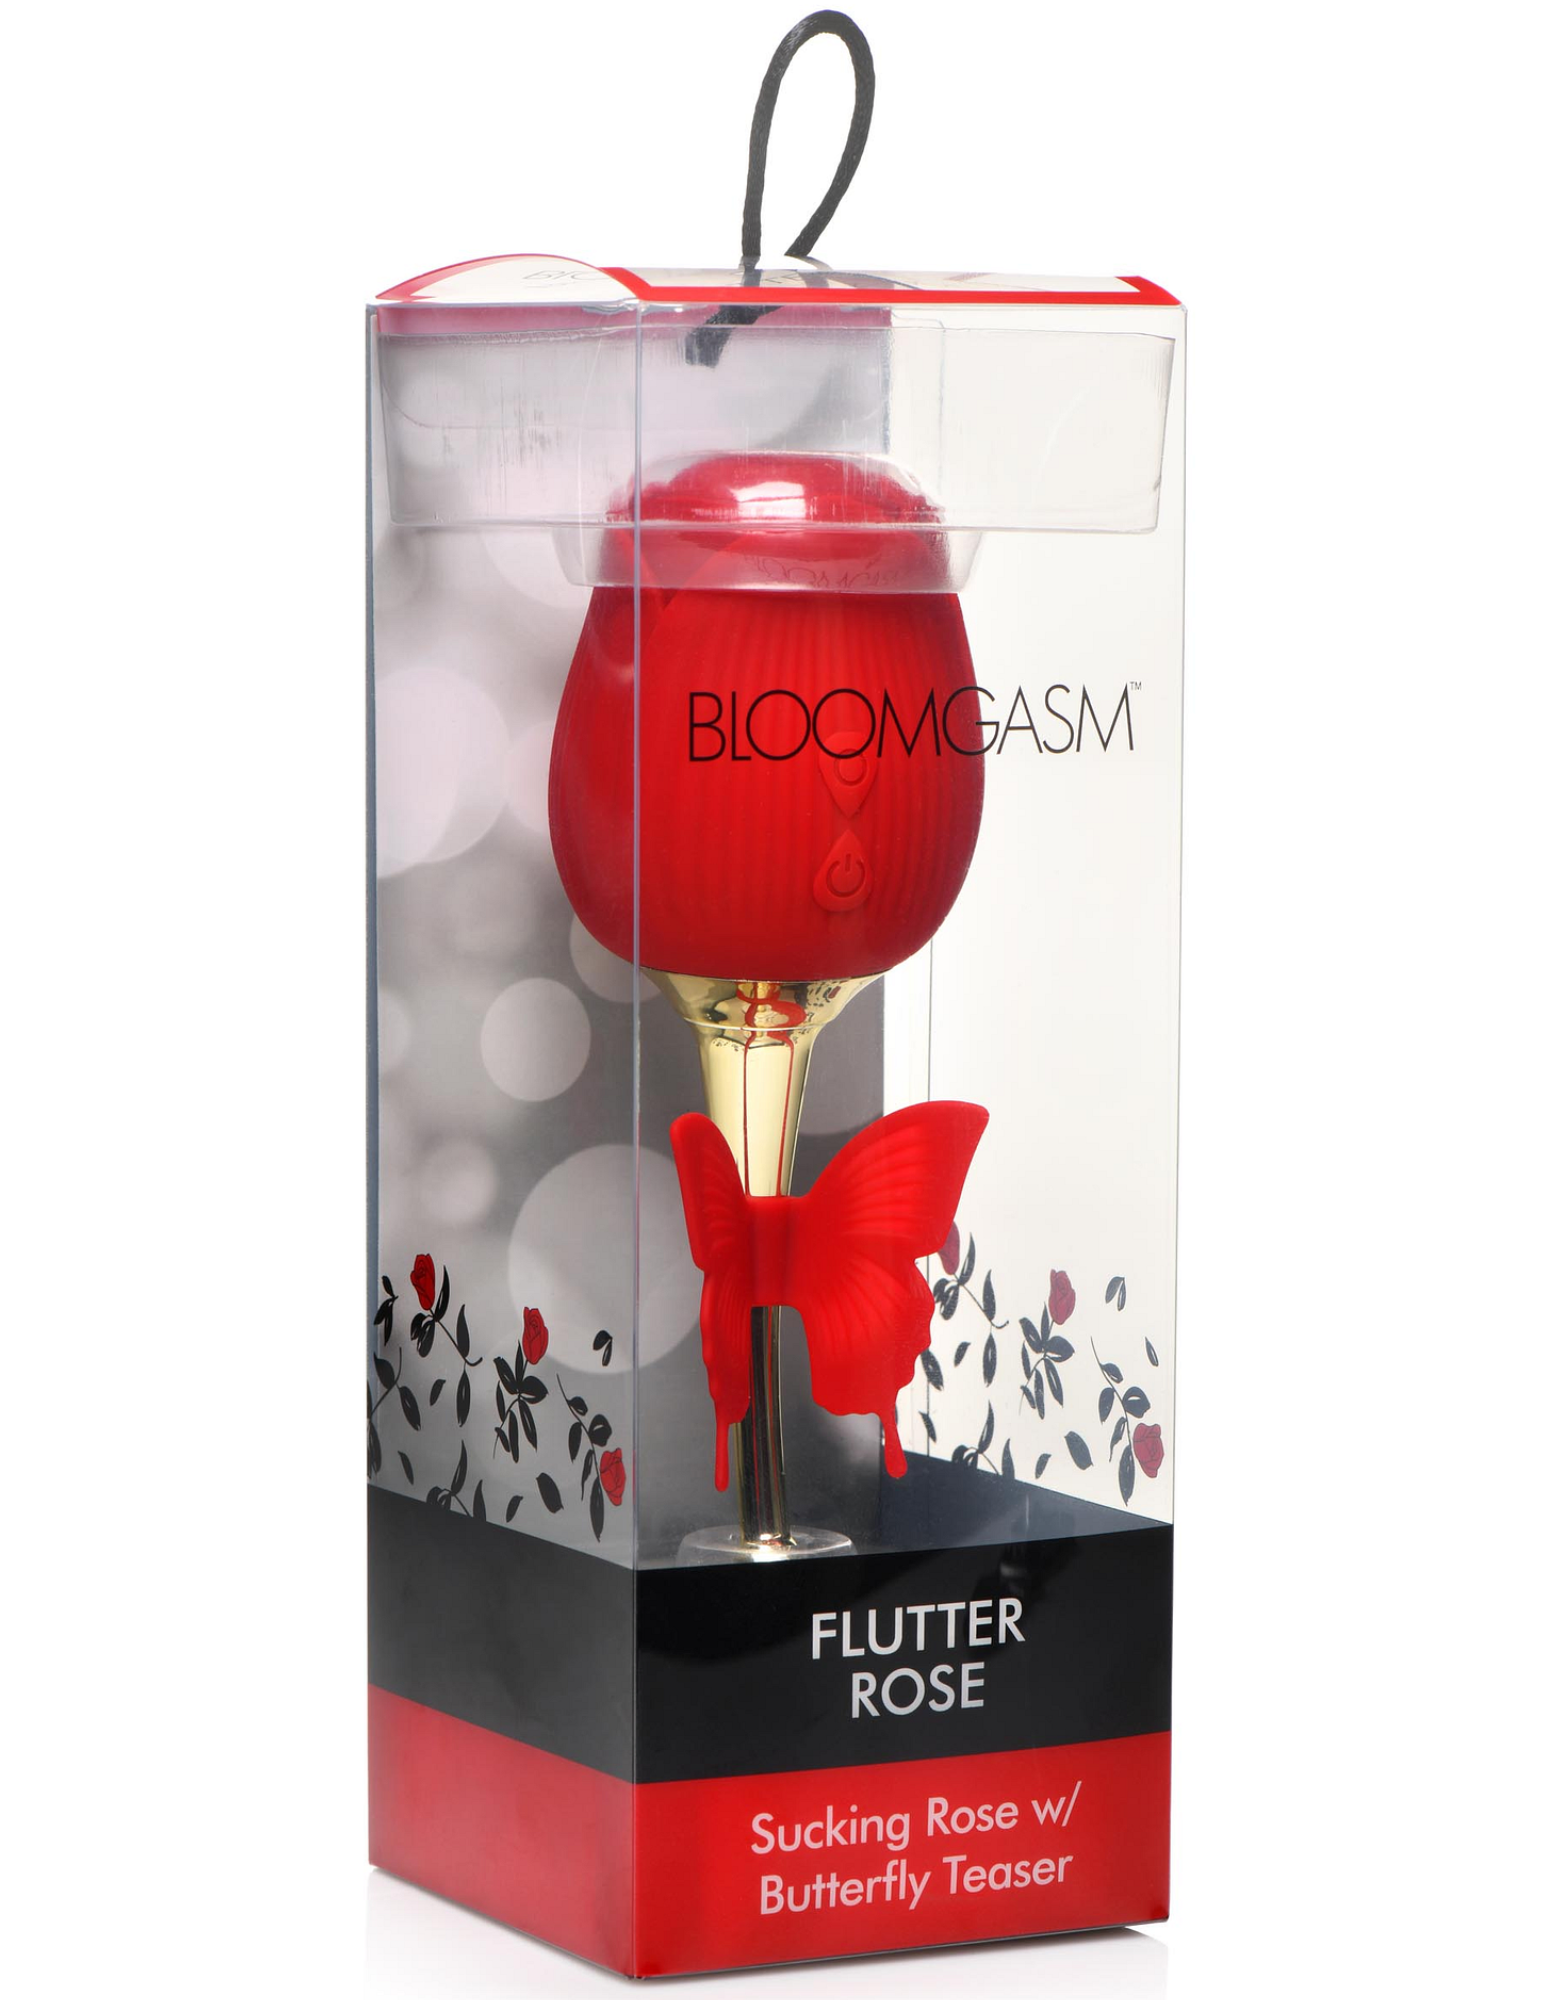 Photo of the Bloomgasm Flutter Rose w/ Butterfly Teaser from XR Brands inside its clear package.